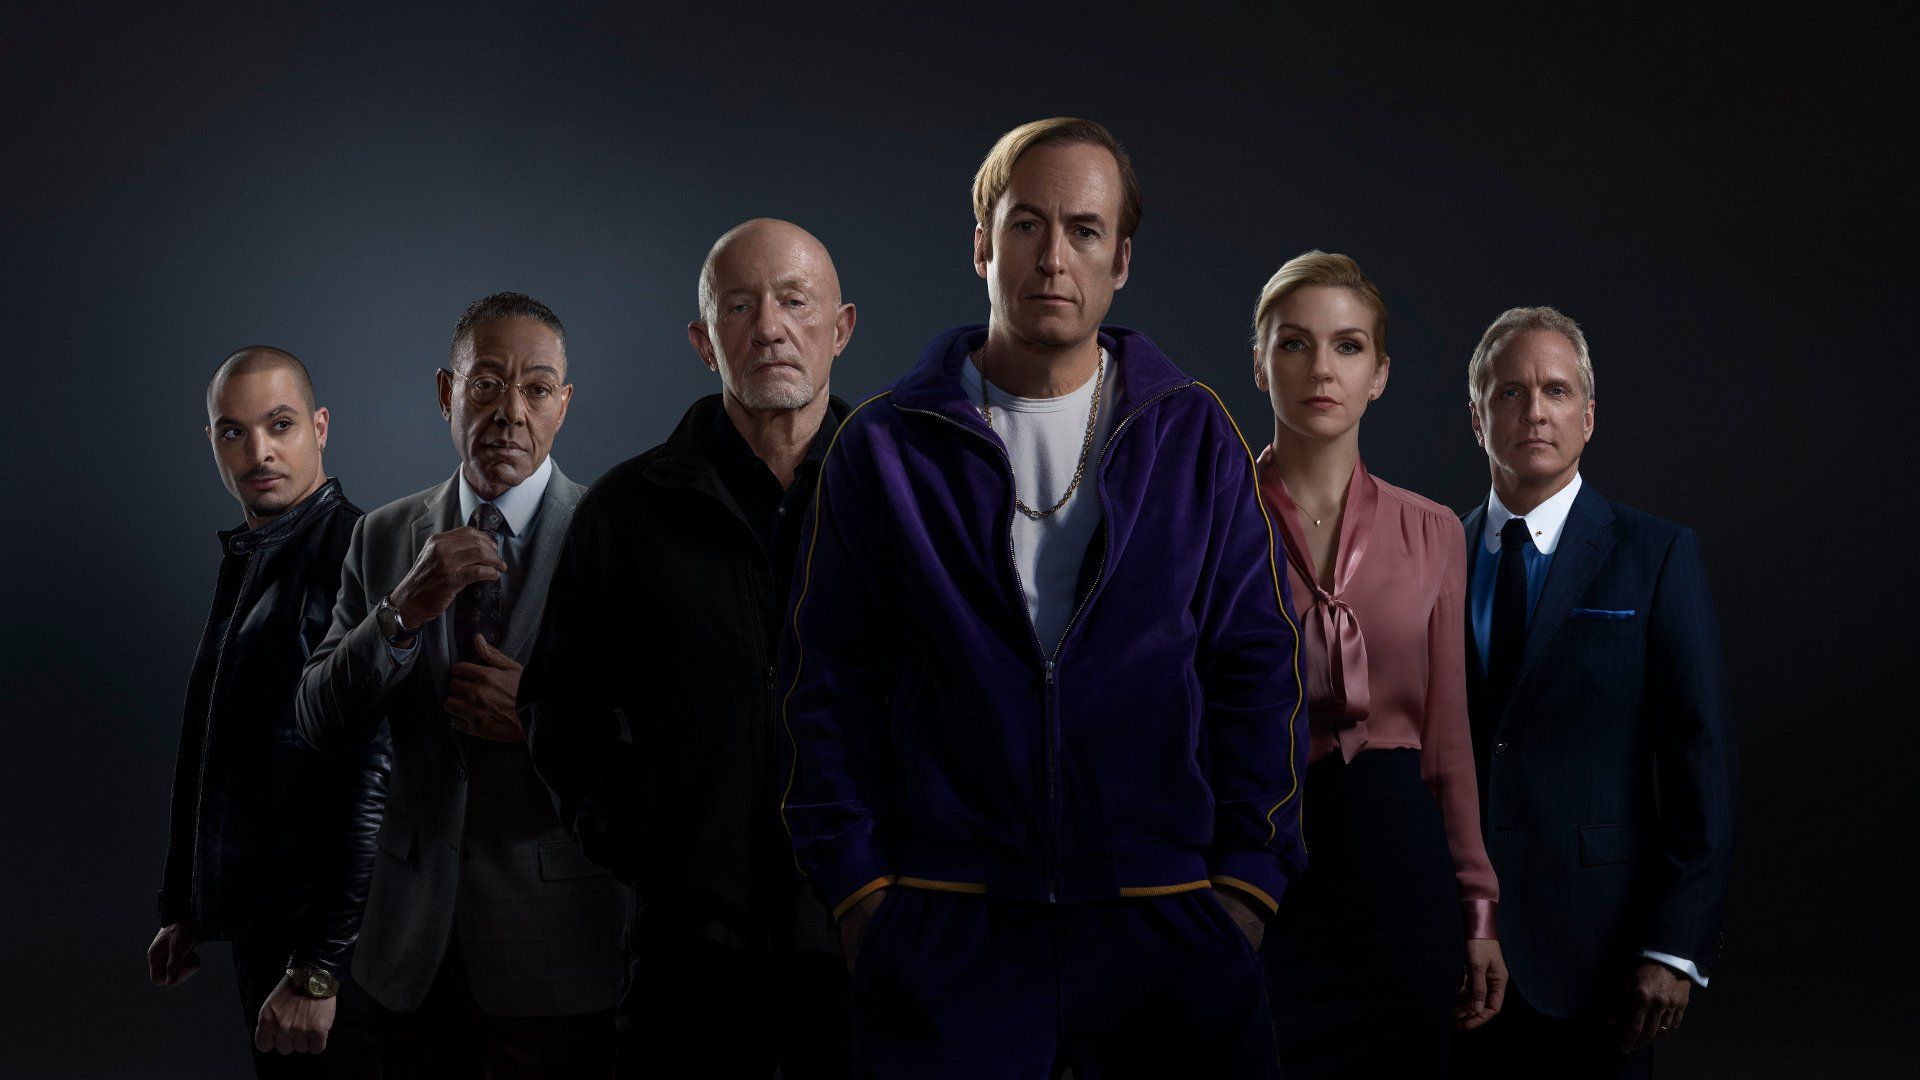 Better Call Saul has finally embraced its destiny as a Breaking